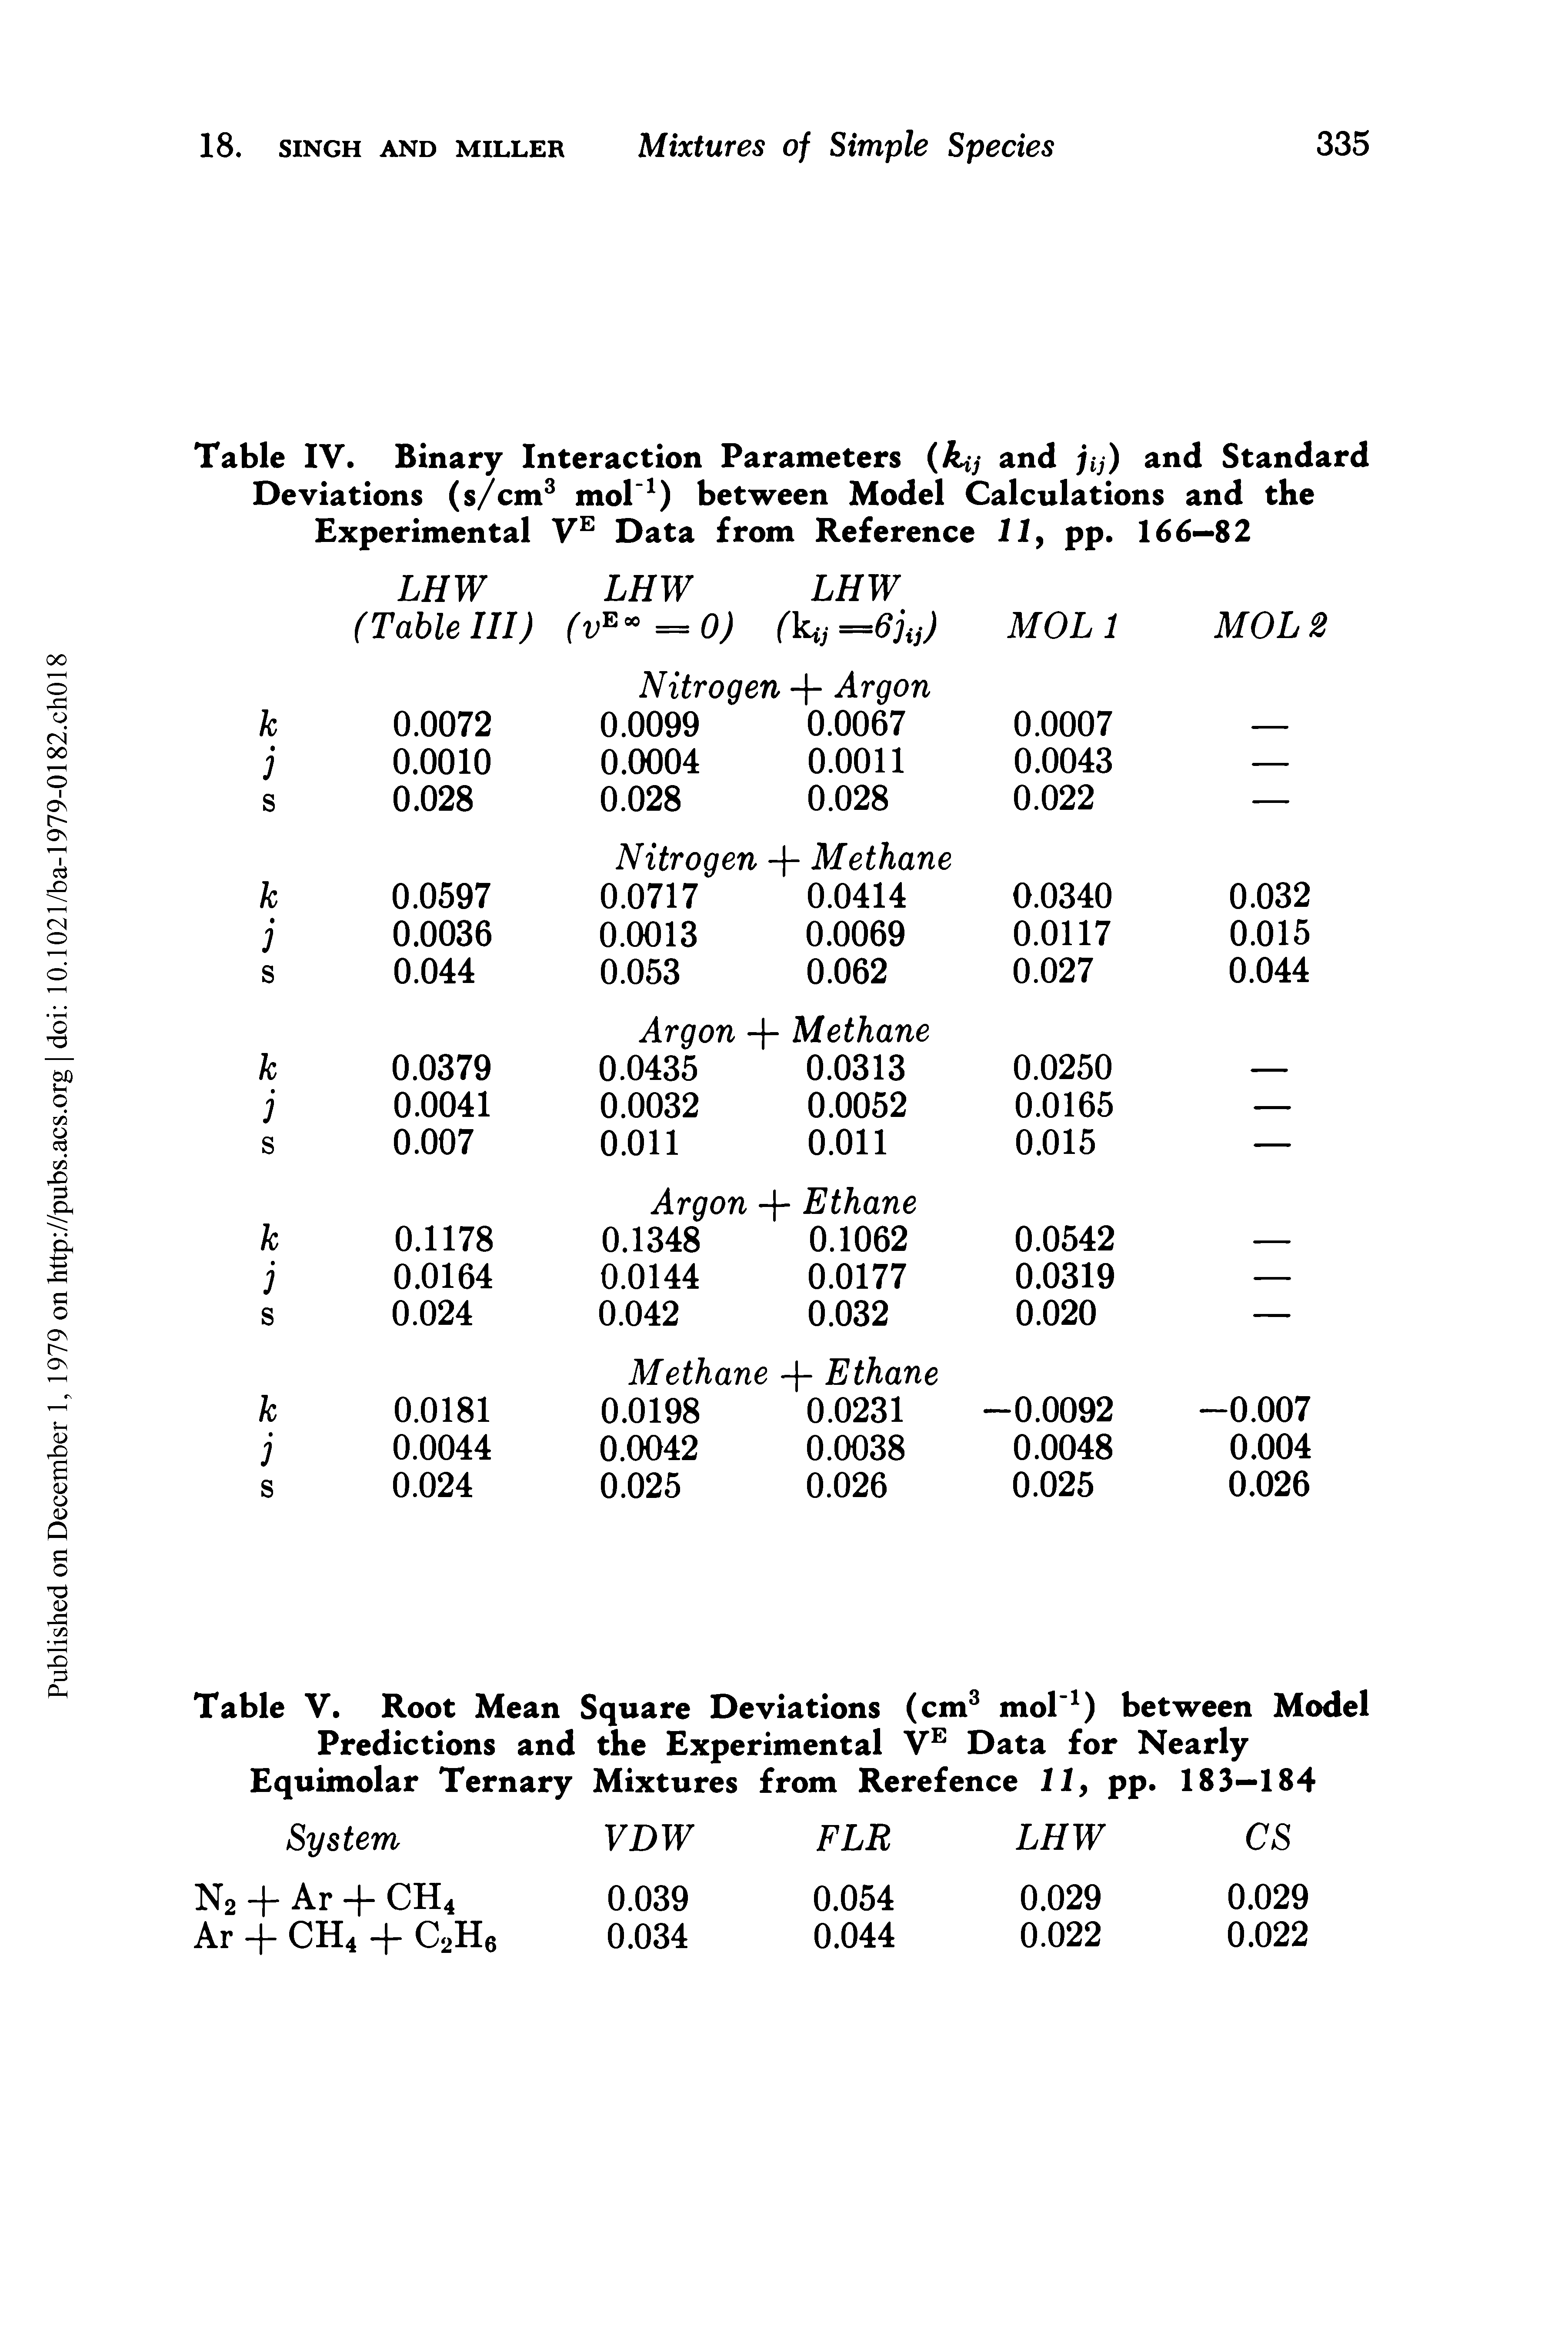 Table V. Root Mean Square Deviations (cm3 mol 1) between Model Predictions and the Experimental VE Data for Nearly Equimolar Ternary Mixtures from Rerefence 11, pp. 183—184...